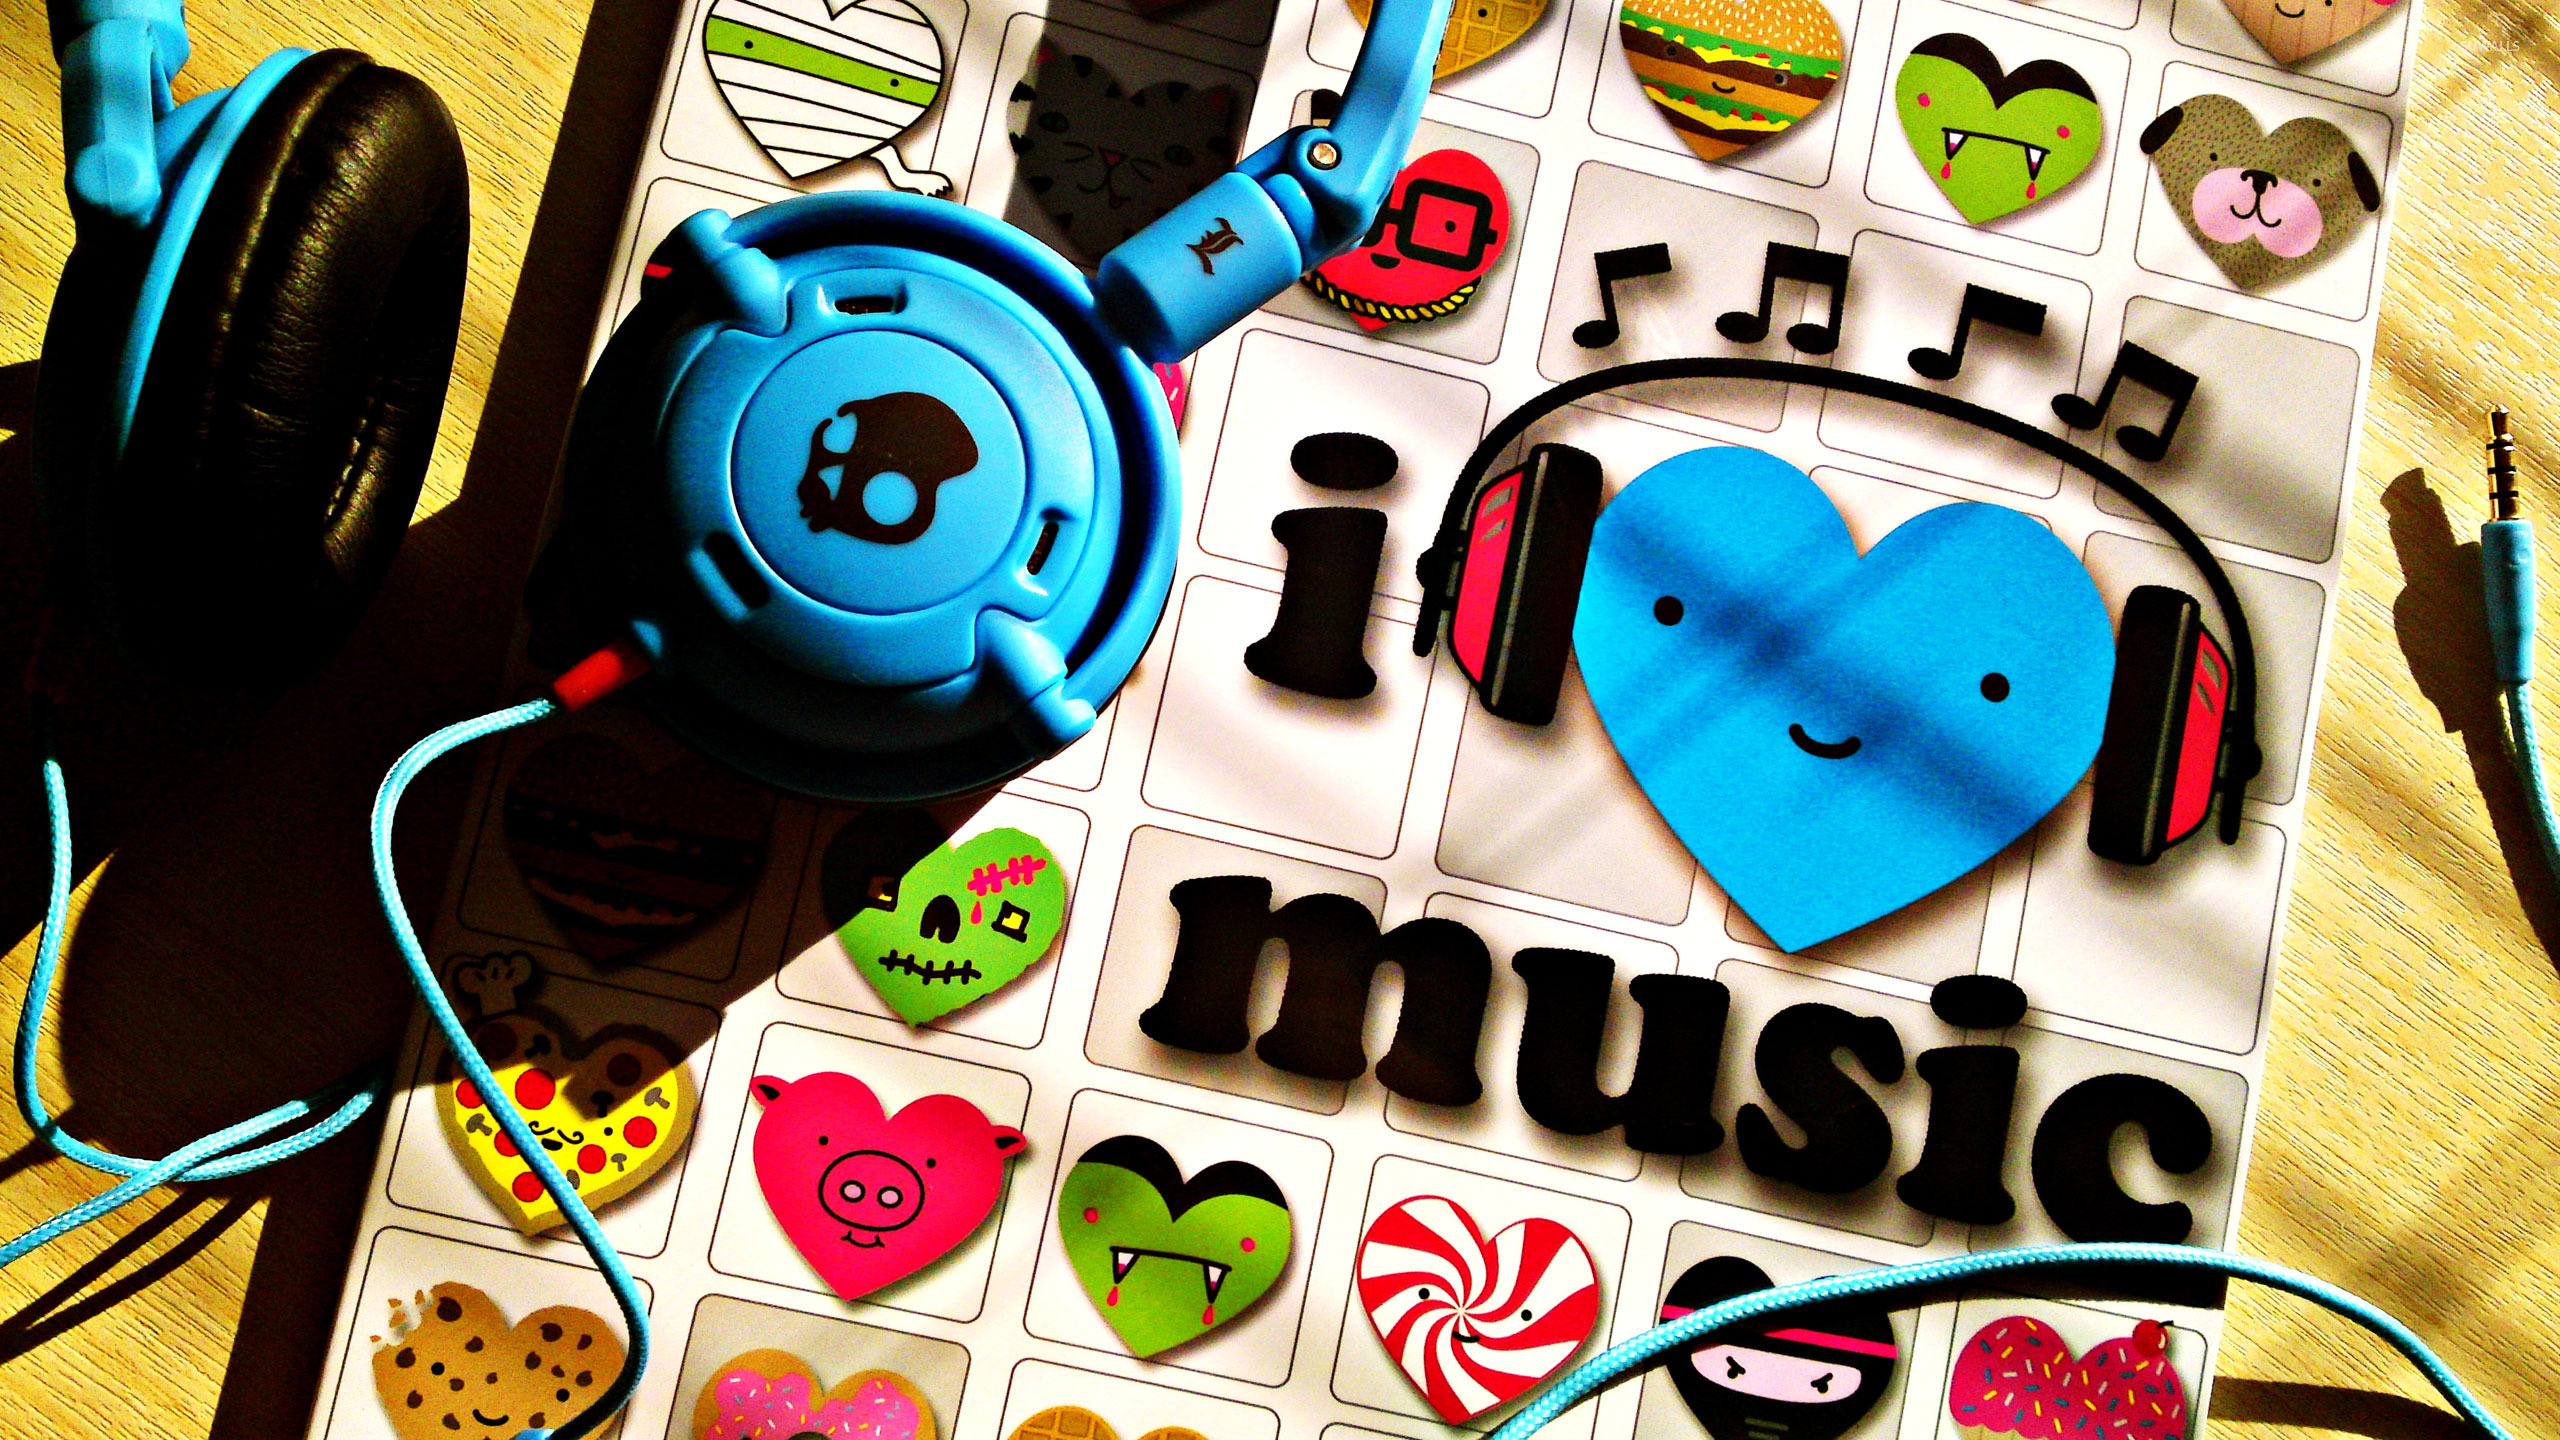 I Love Music Wallpapers